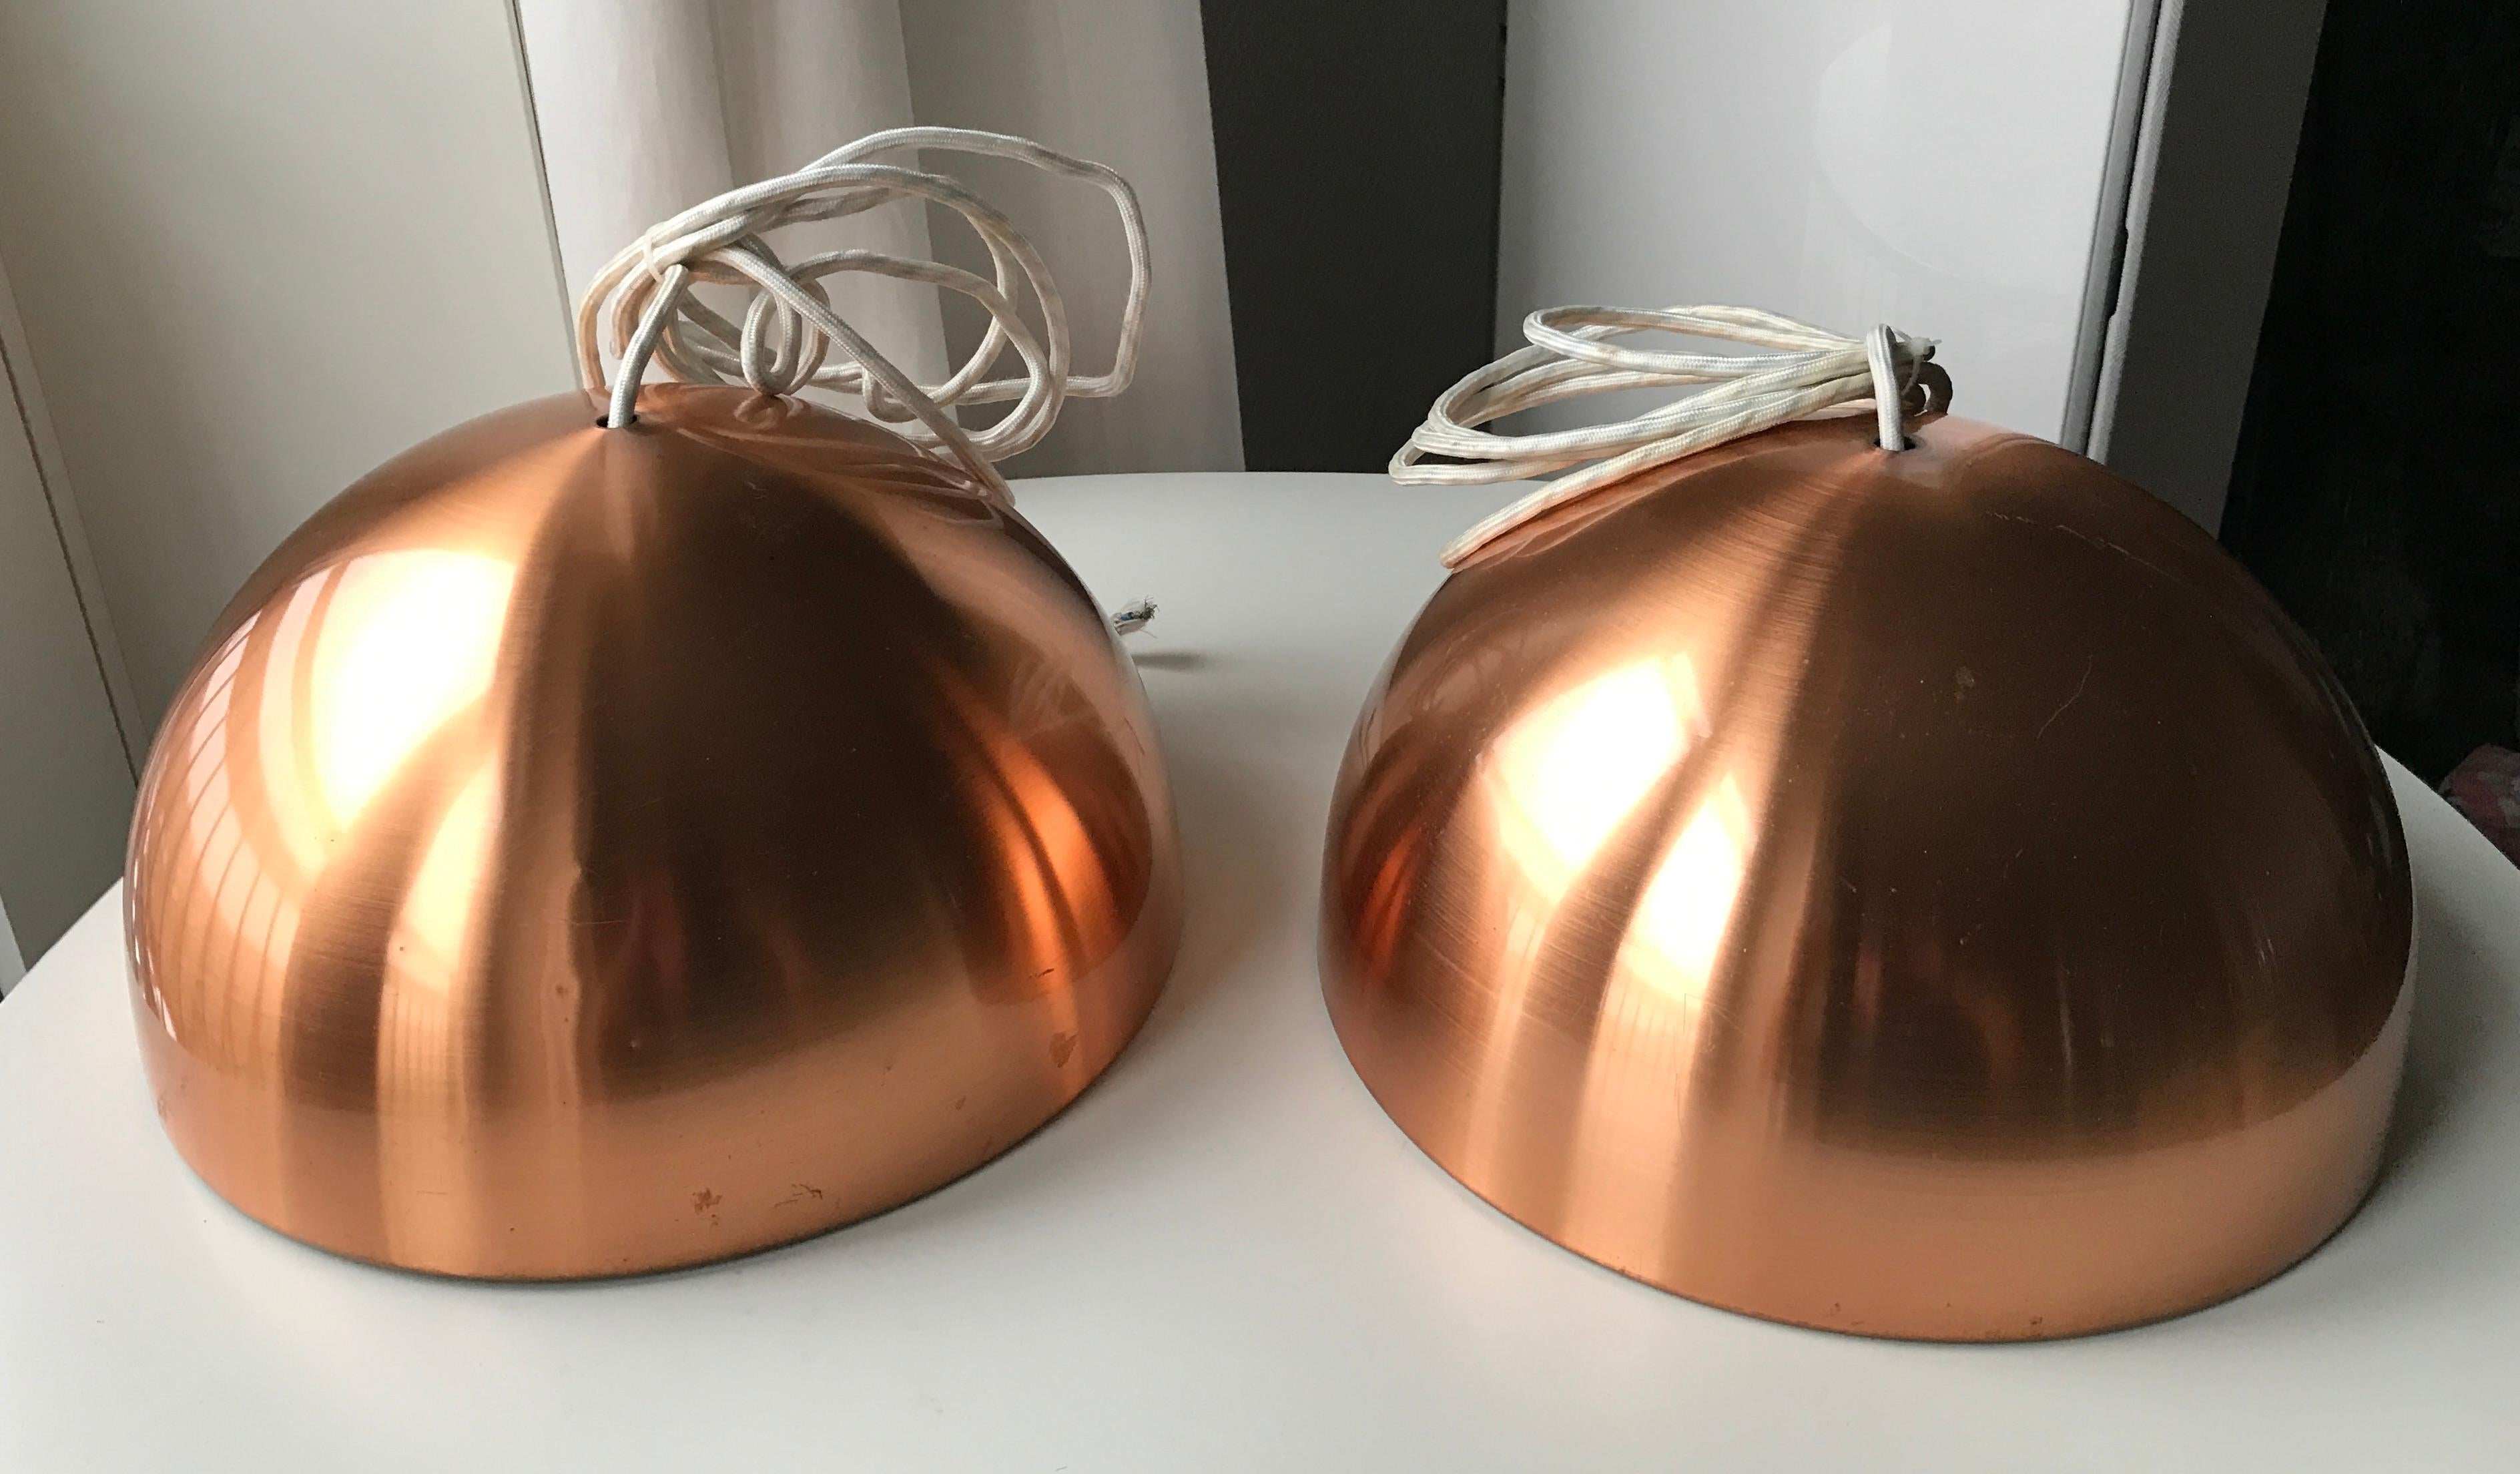 Louisiana Scandinavian modern pendants manufactured by Louis Poulsen, Denmark. Designed by architects Vilhelm Wohlert and Jørgen Bo. The duo was the architects responsible for world famous art museum Louisiana situated north of Copenhagen in 1958.